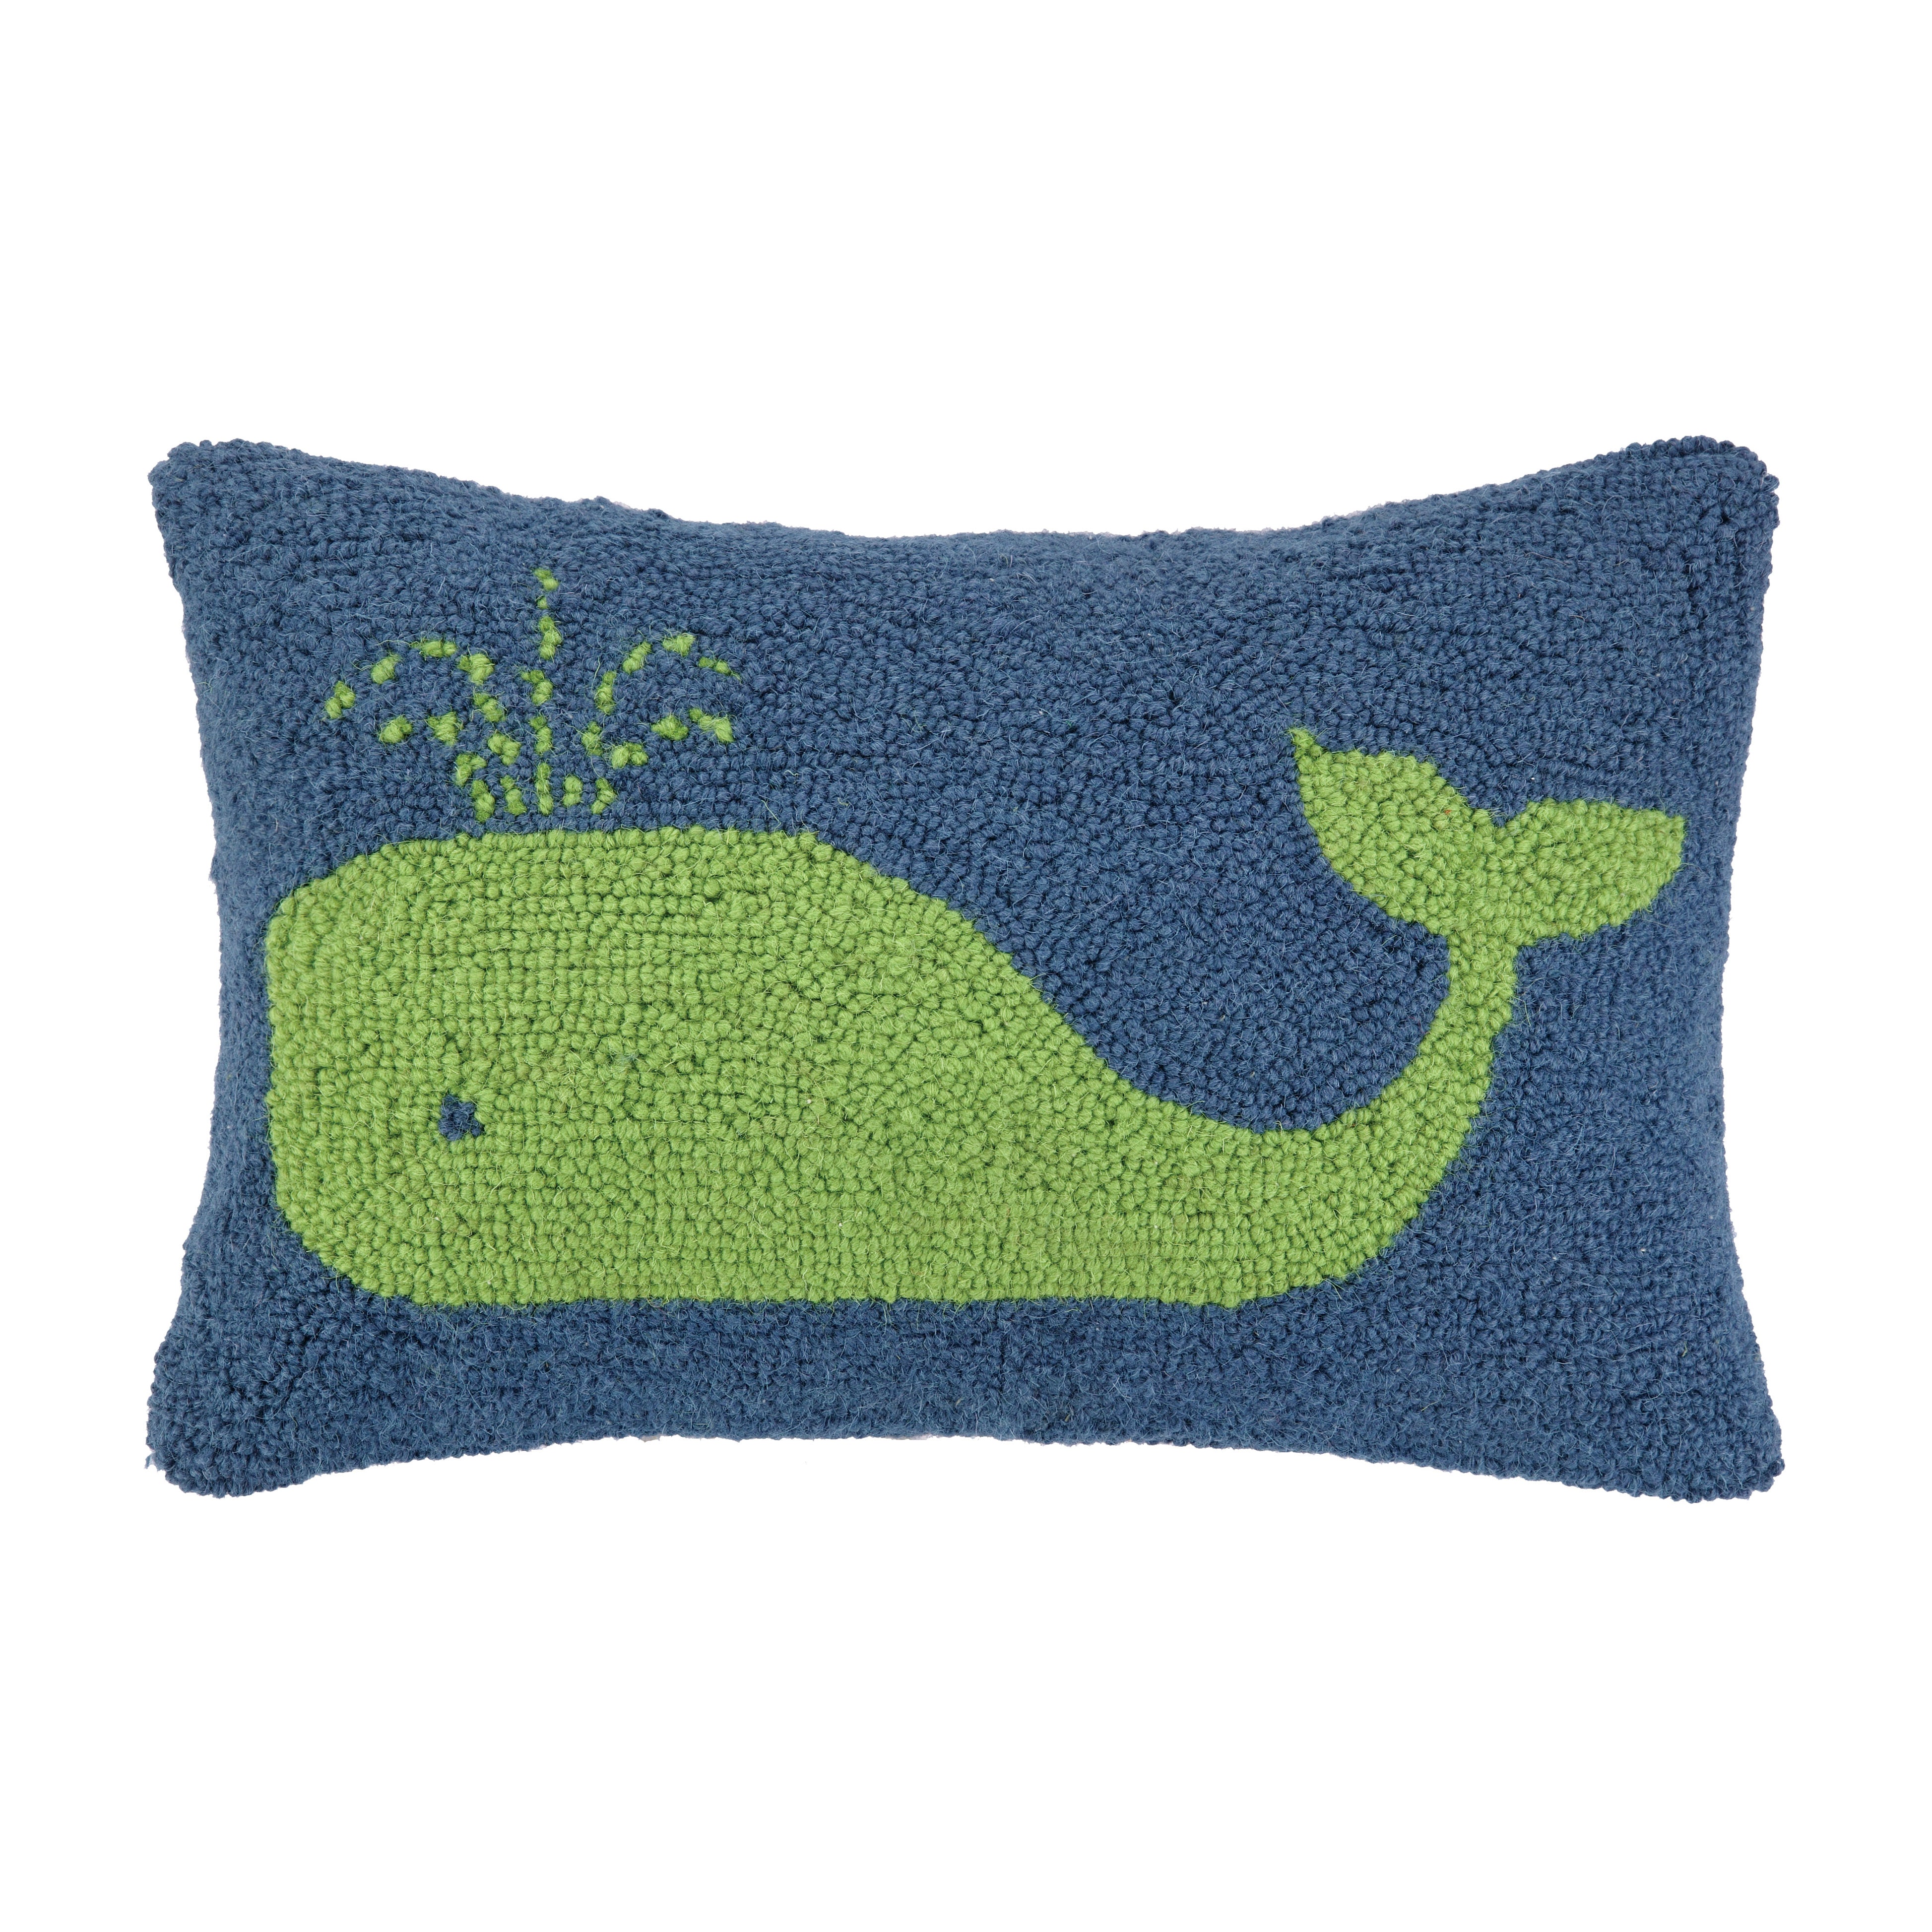 Green Whale Hook Pillow 12X18 – Smyth Jewelers